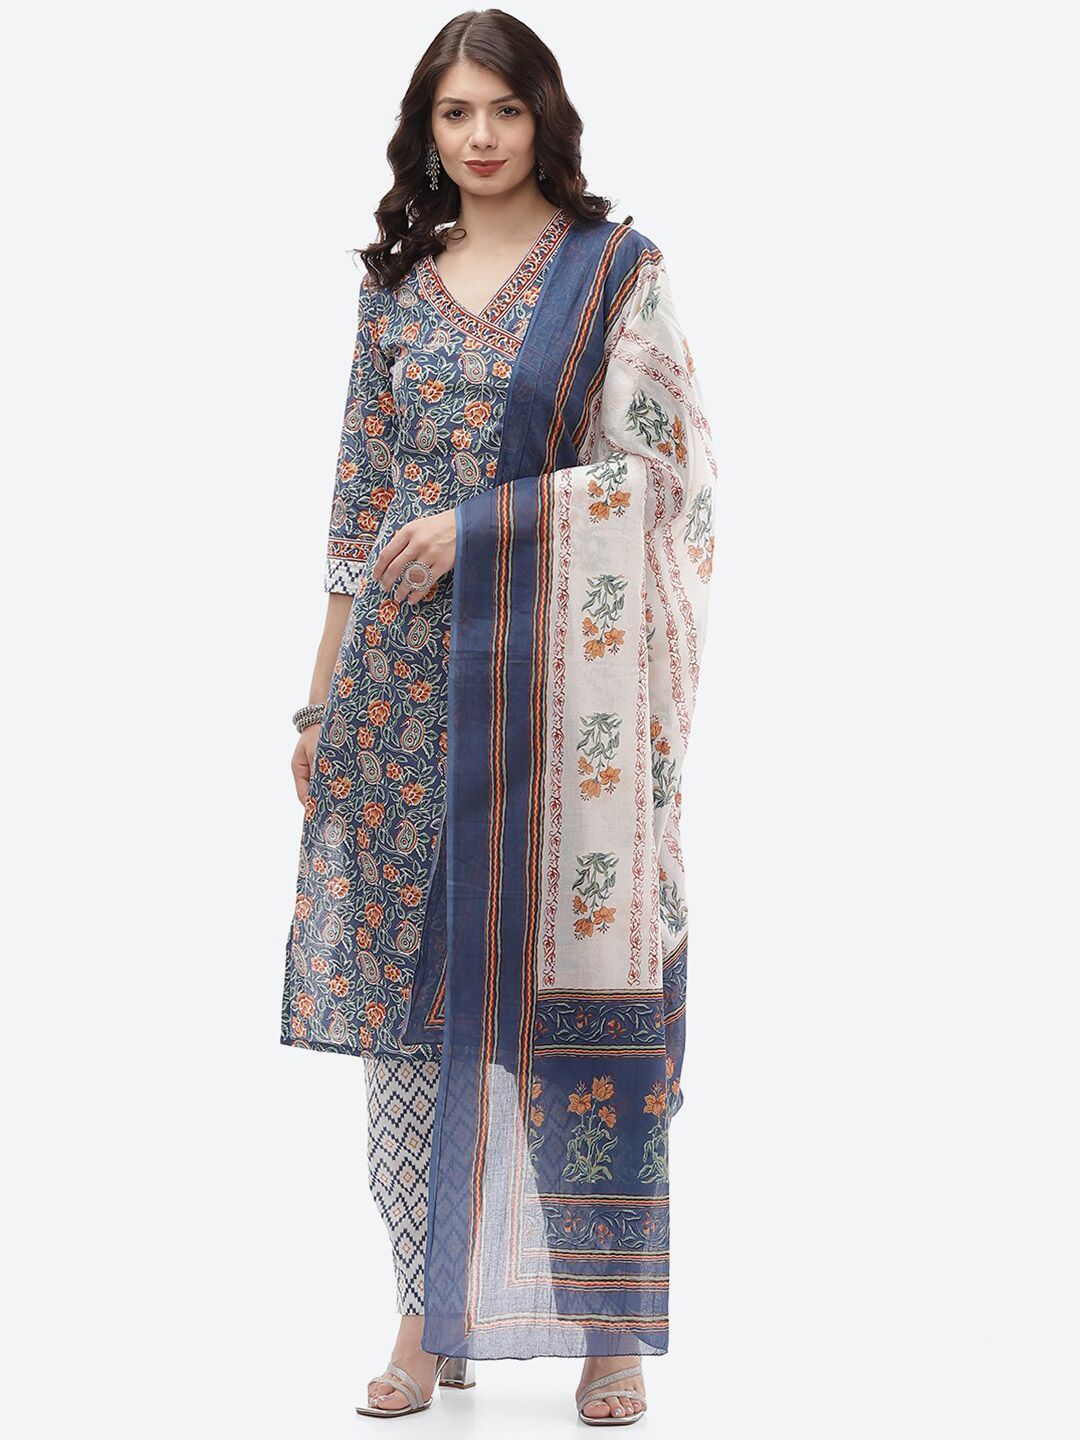 Biba Blue & Mustard Printed Unstitched Dress Material Price in India